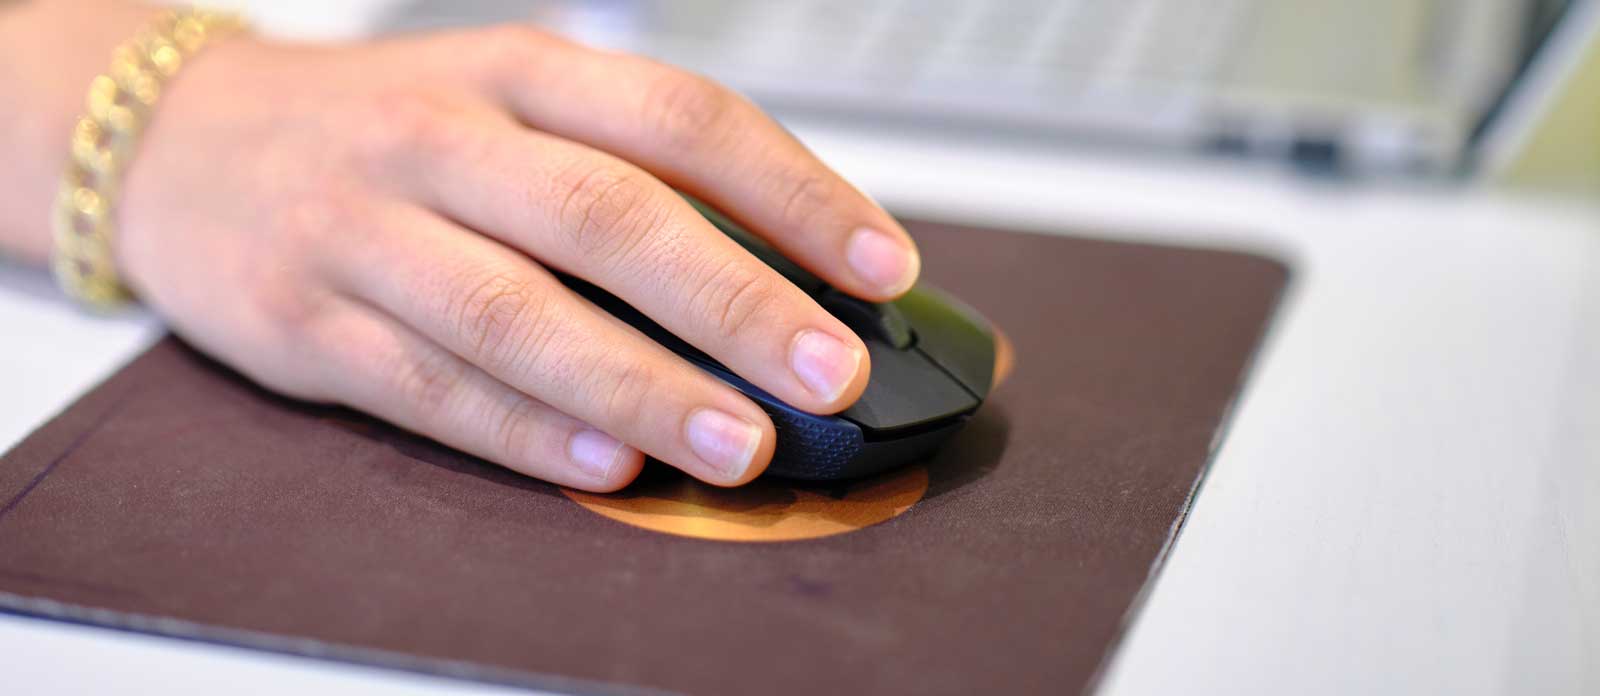 What are the advantages of a wireless mouse?